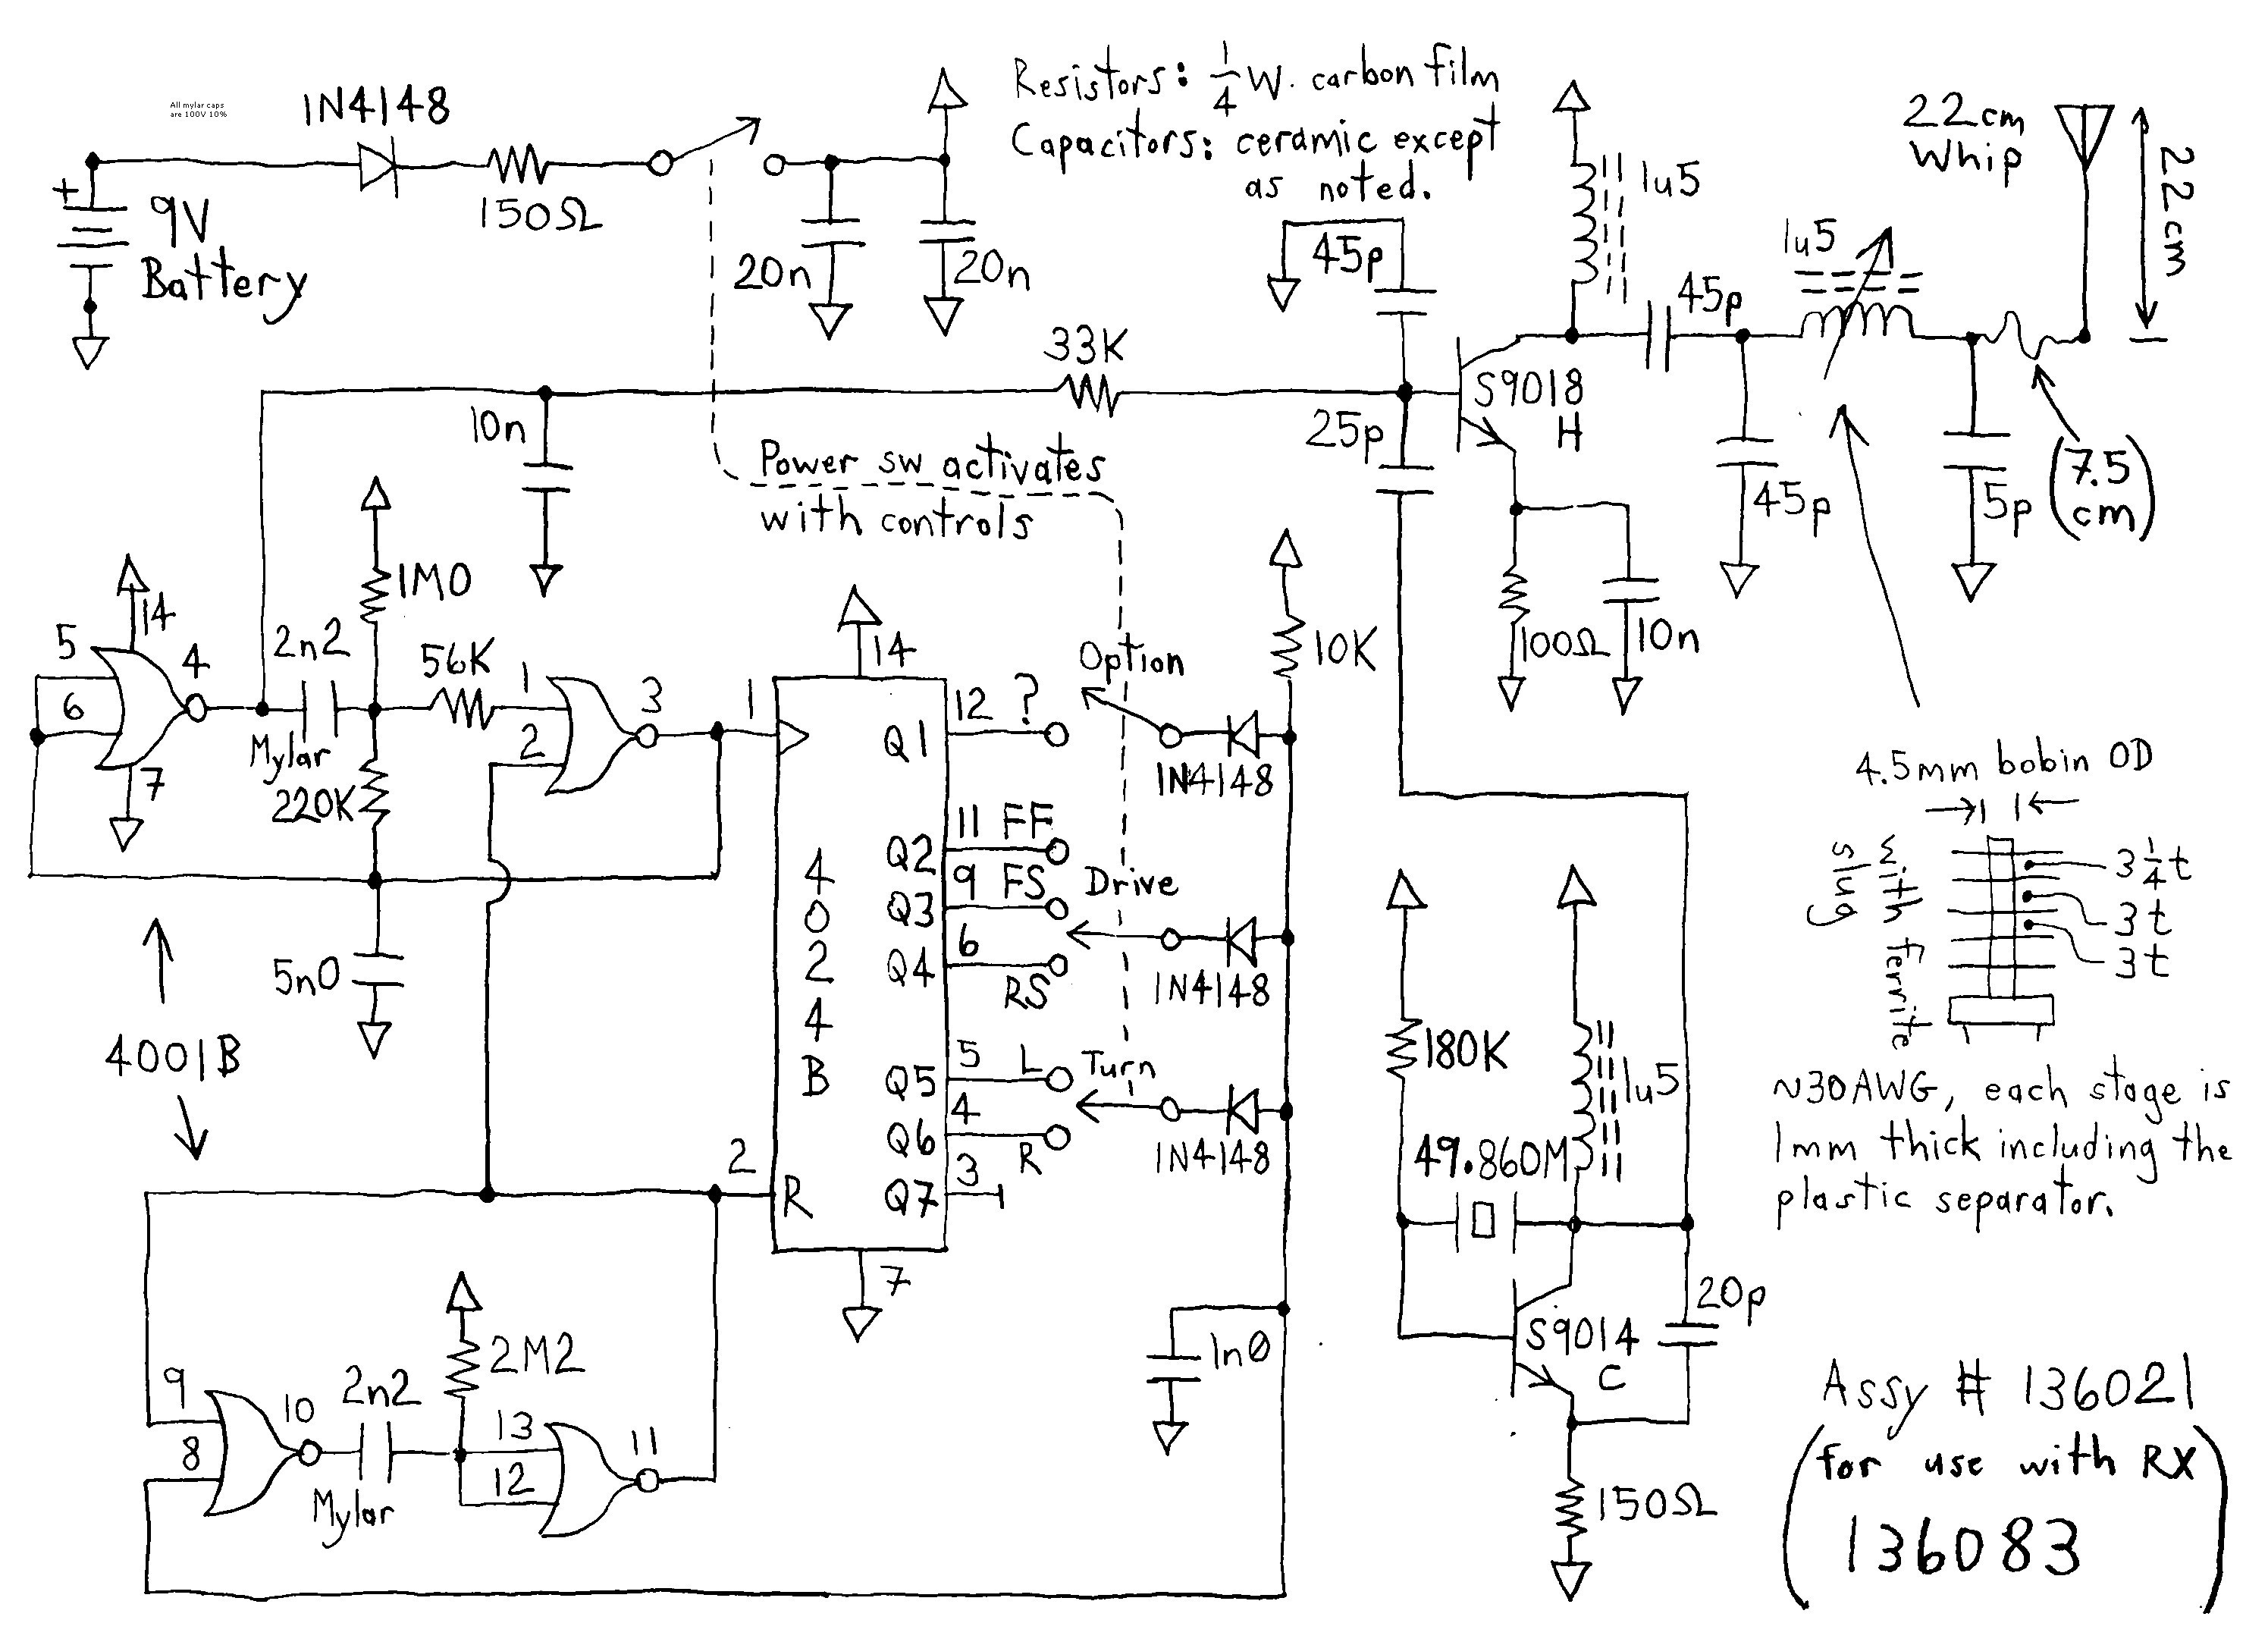 Wiring Diagram for Race Car Fresh Wiring Diagram for Legend Race Car Valid Circuit Board Wiring